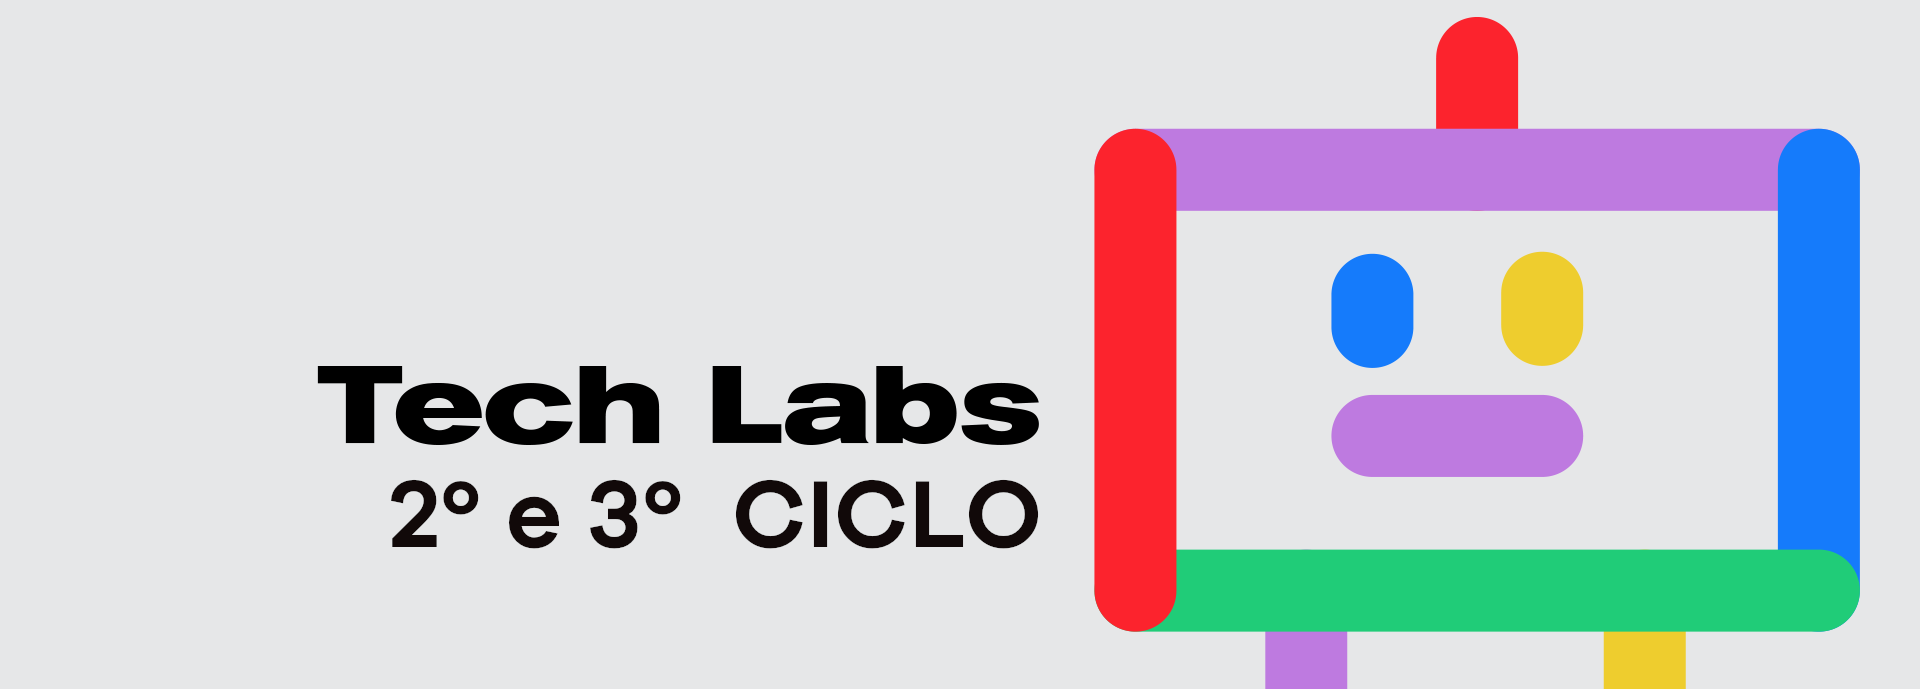 TechLabs_Header_2e3ciclo.png